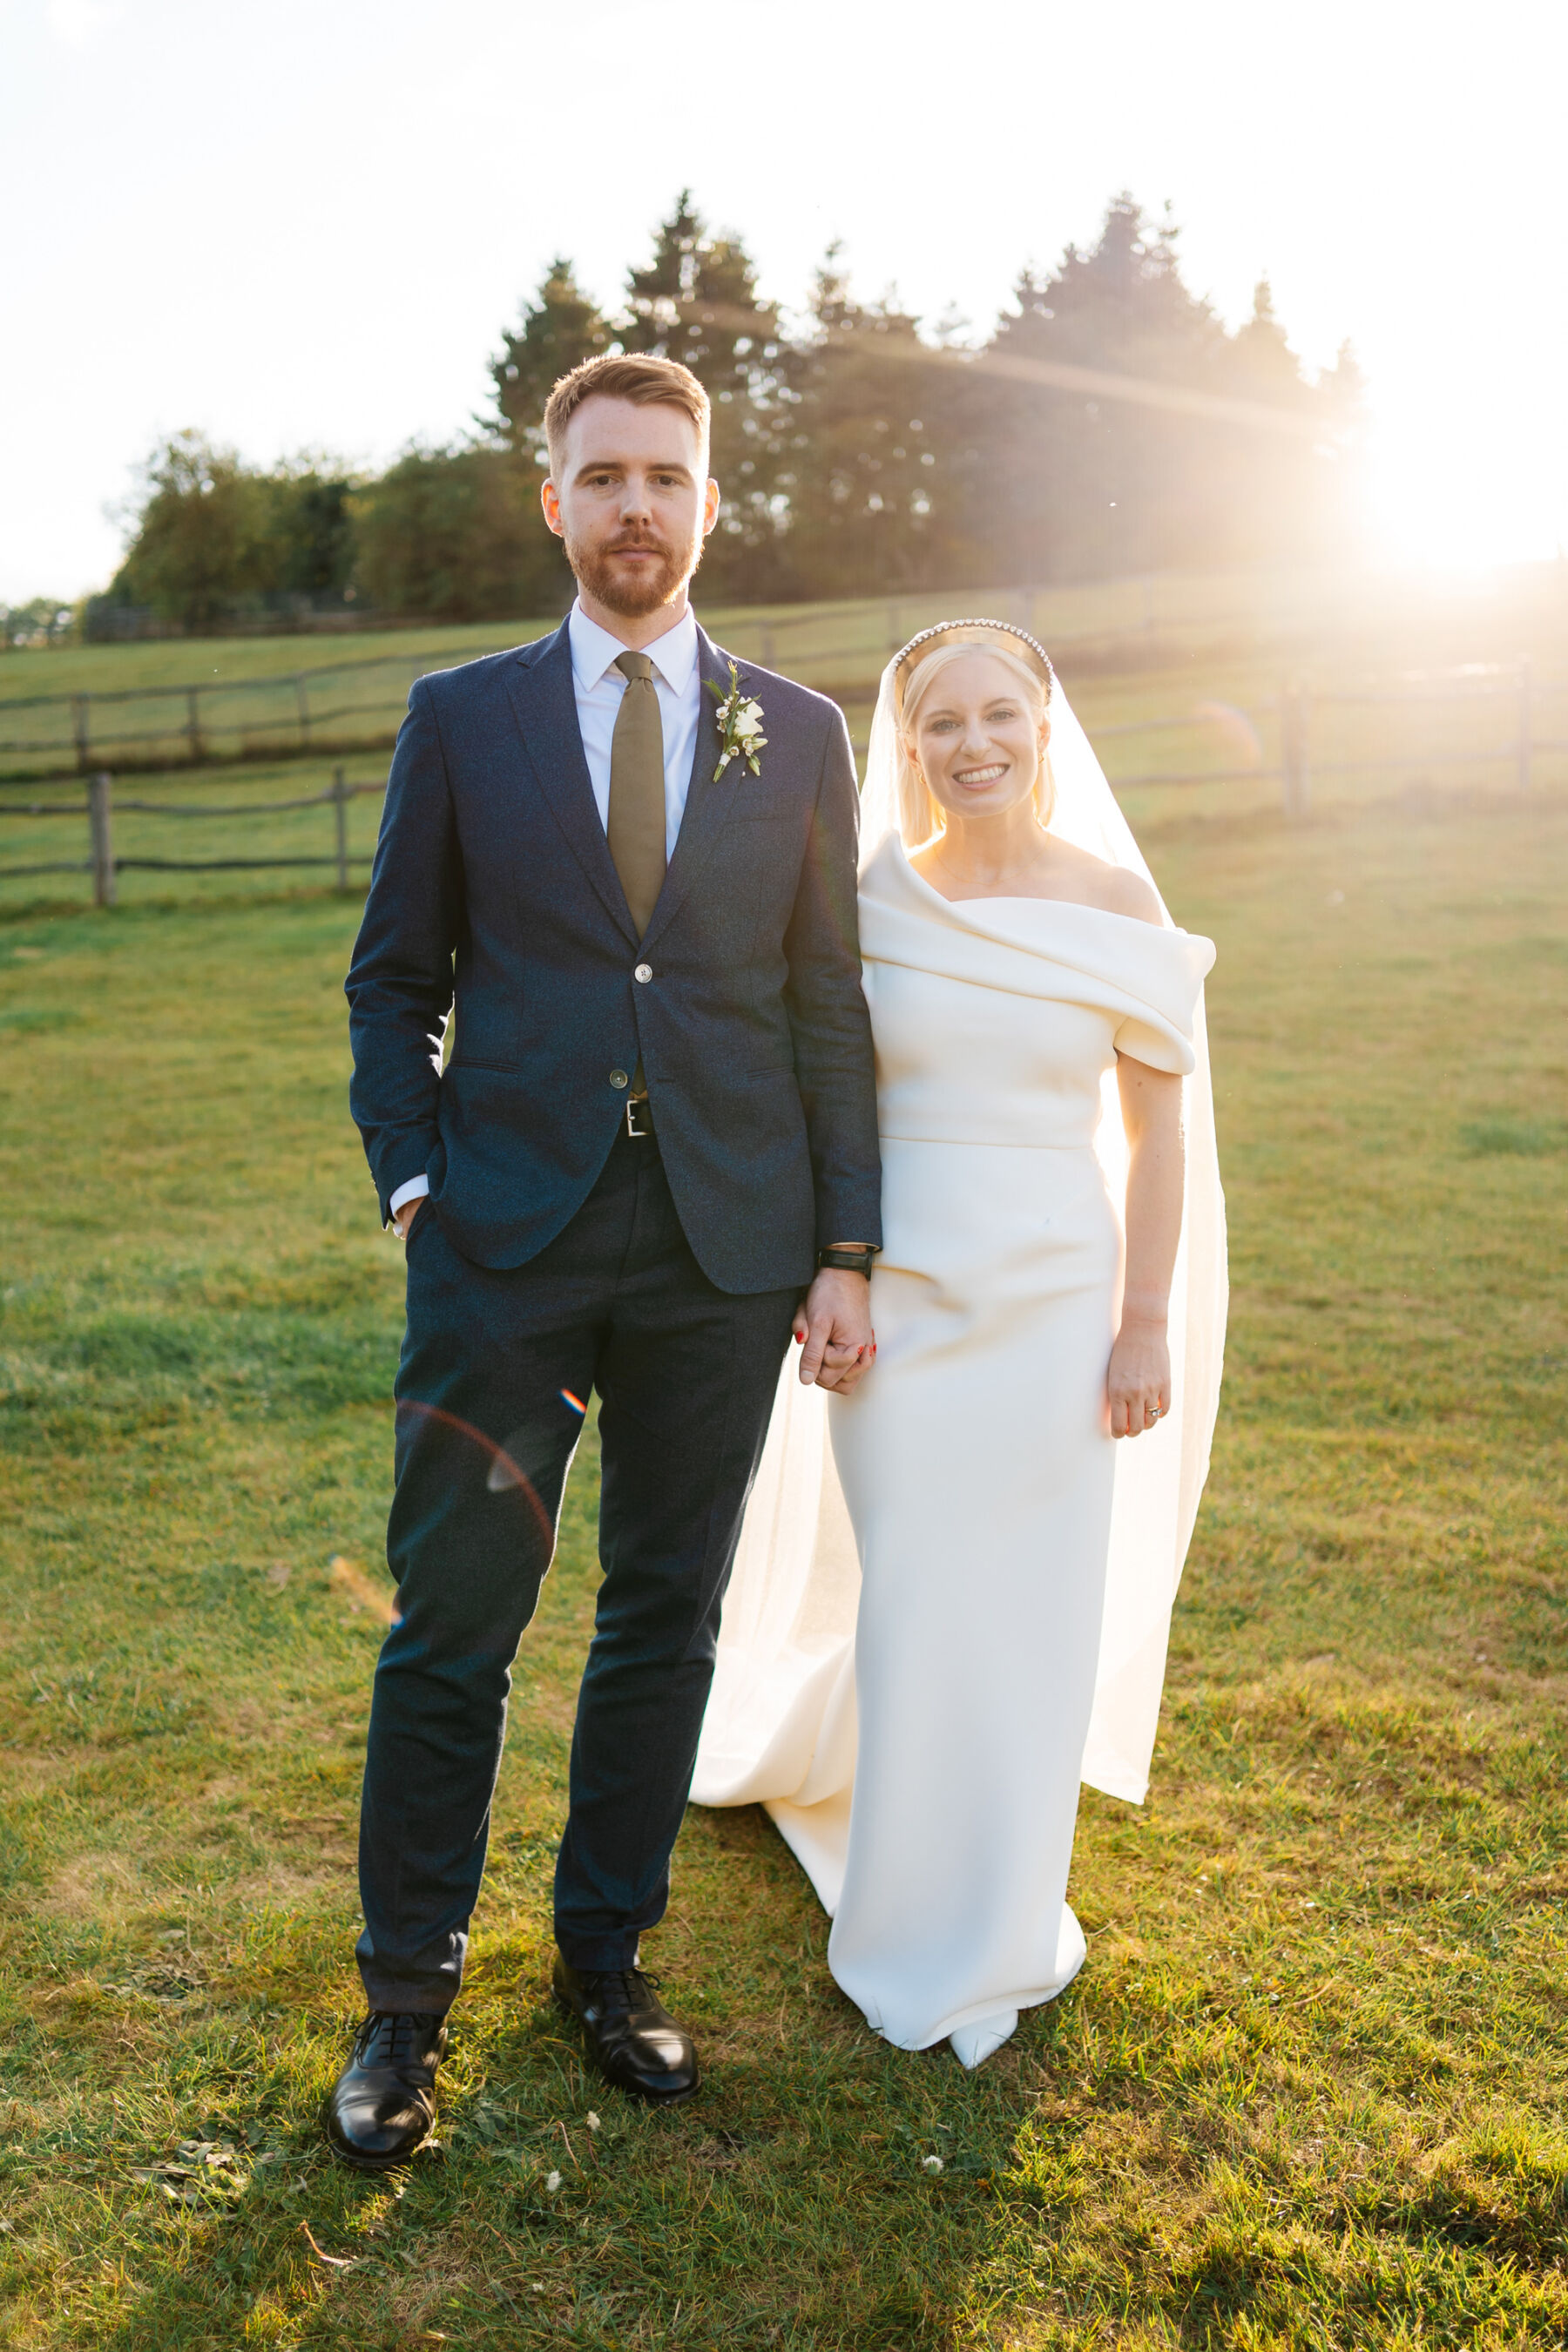 Bride wearing Toni Maticevski wedding dress & gold crown. Groom in a blue suit and green tie. Golden hour wedding photography by Marianne Chua Photography.